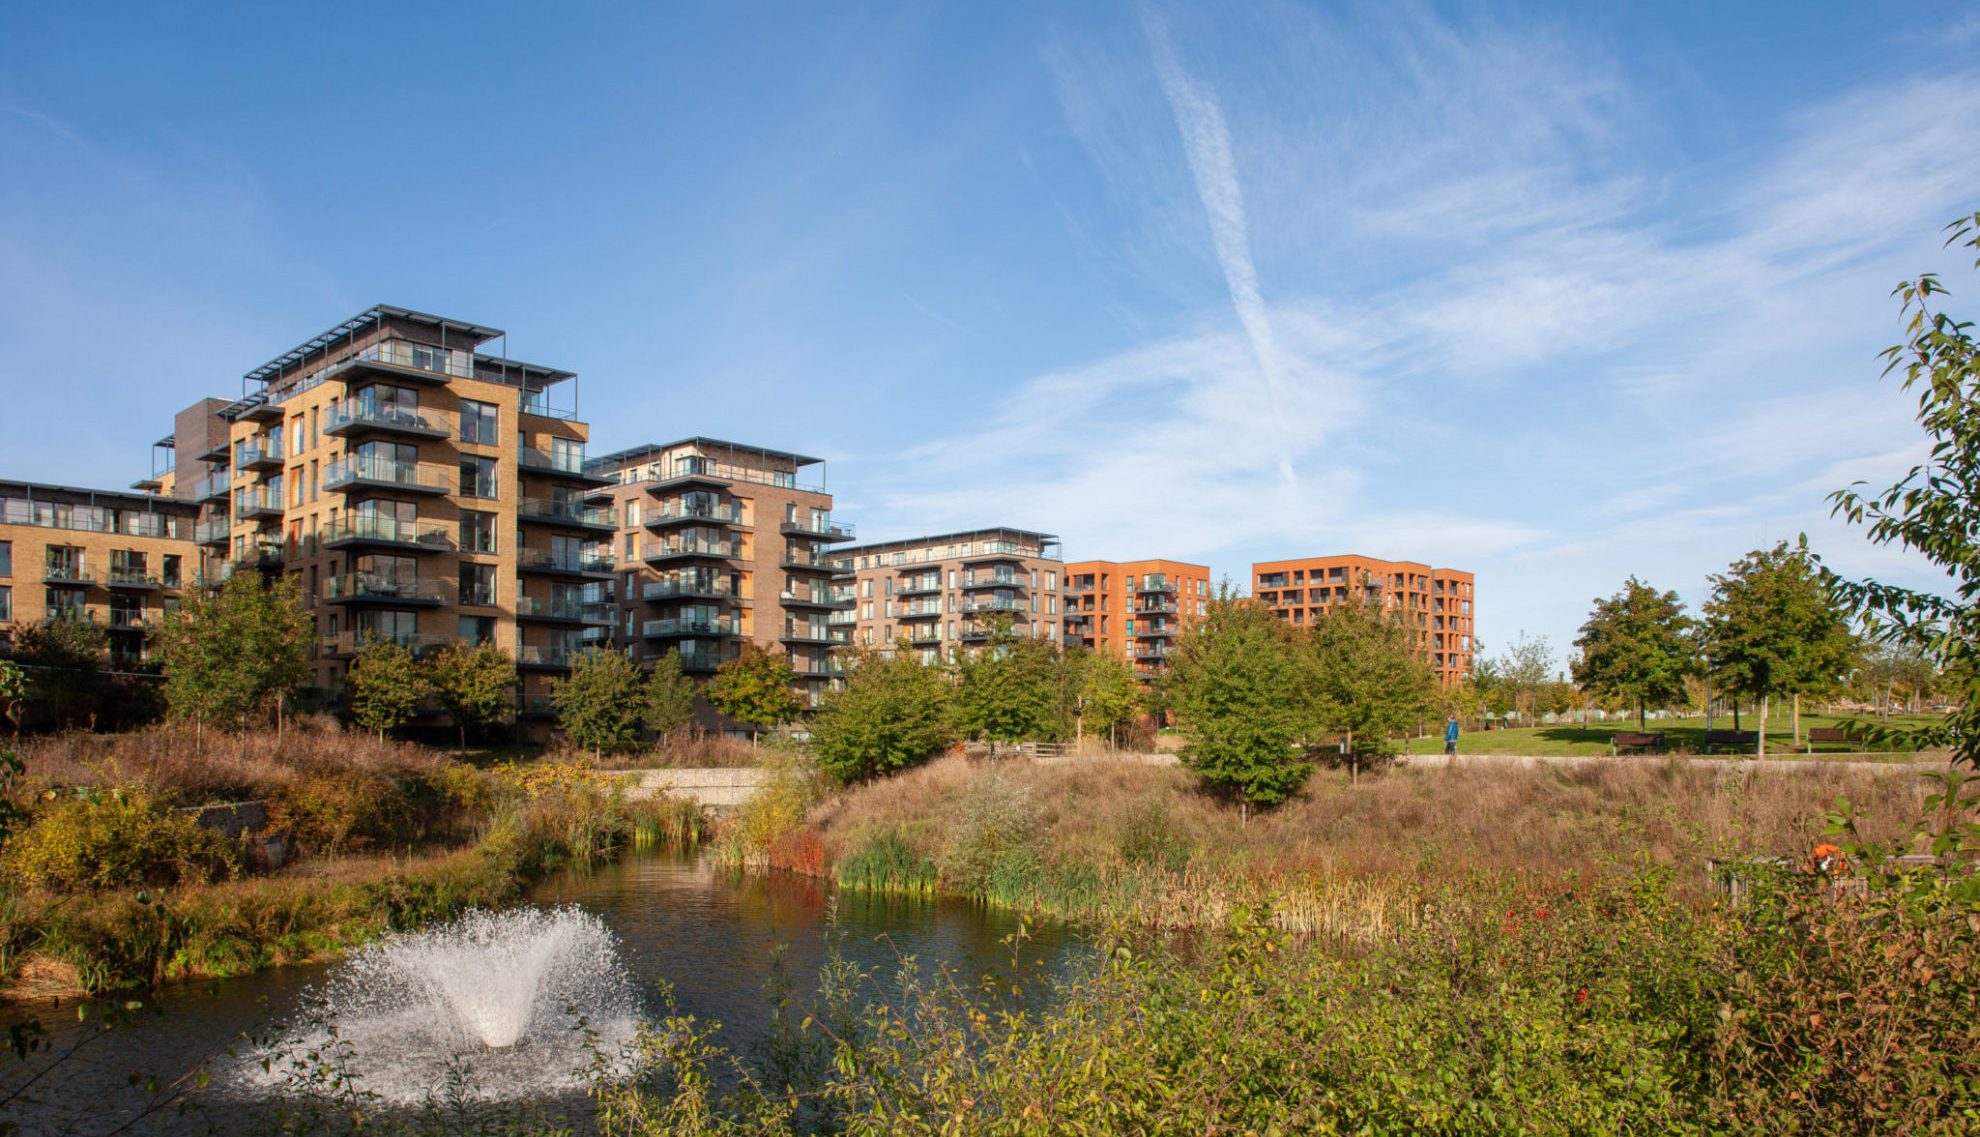 Kidbrooke Village, which offers housing association homes by L&Q